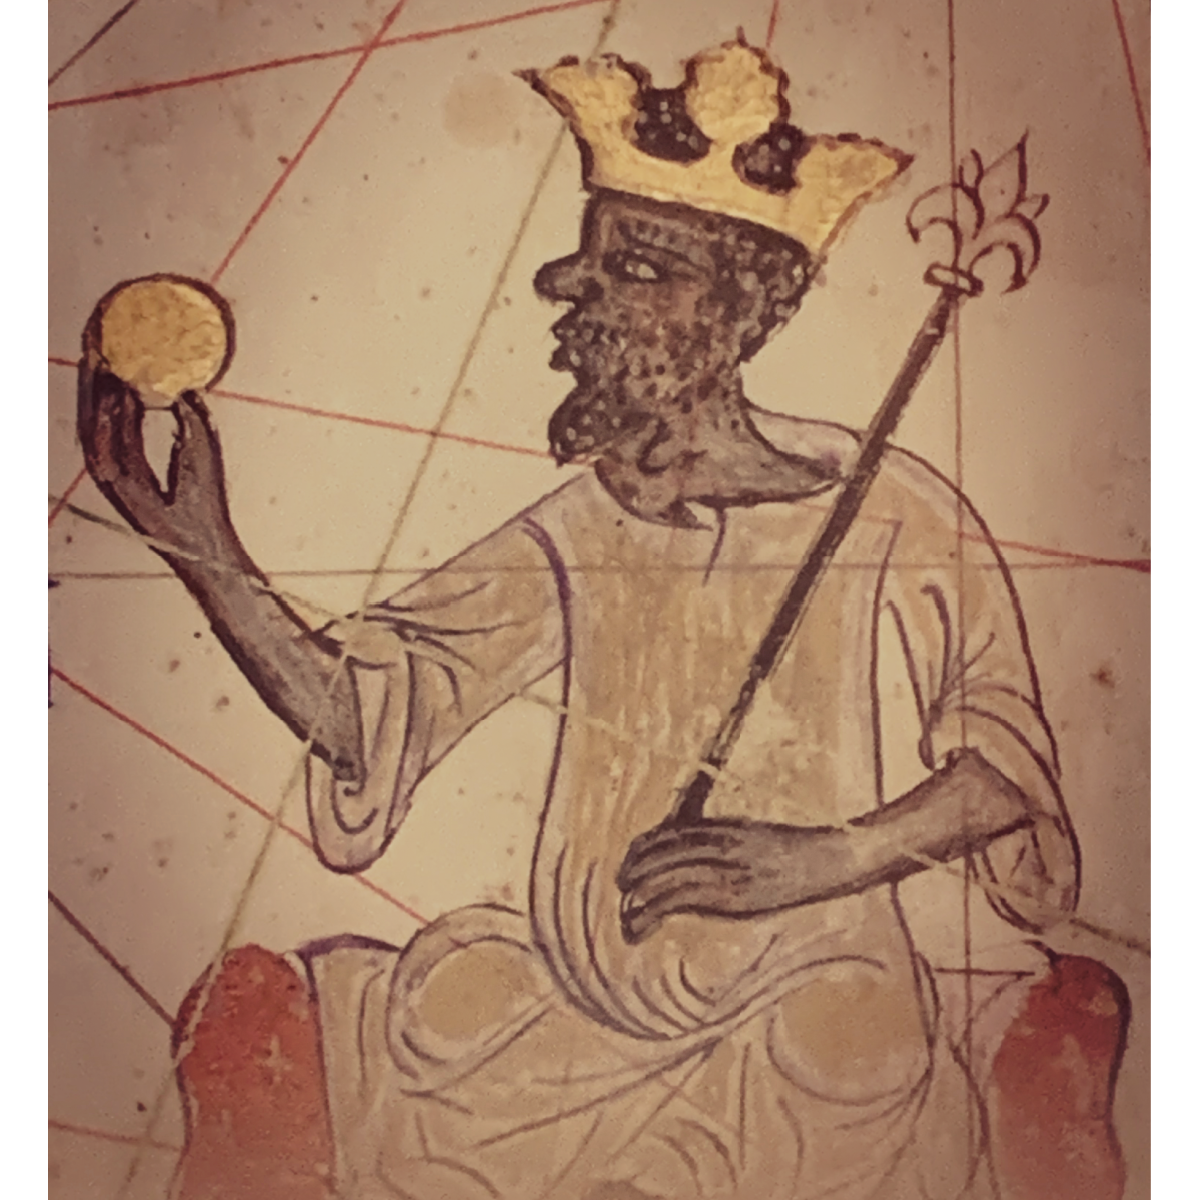 King Mansa Musa of the Mali Empire (14th Century) wears a golden crown and holds up a golden ball with a scepter in his left hand.